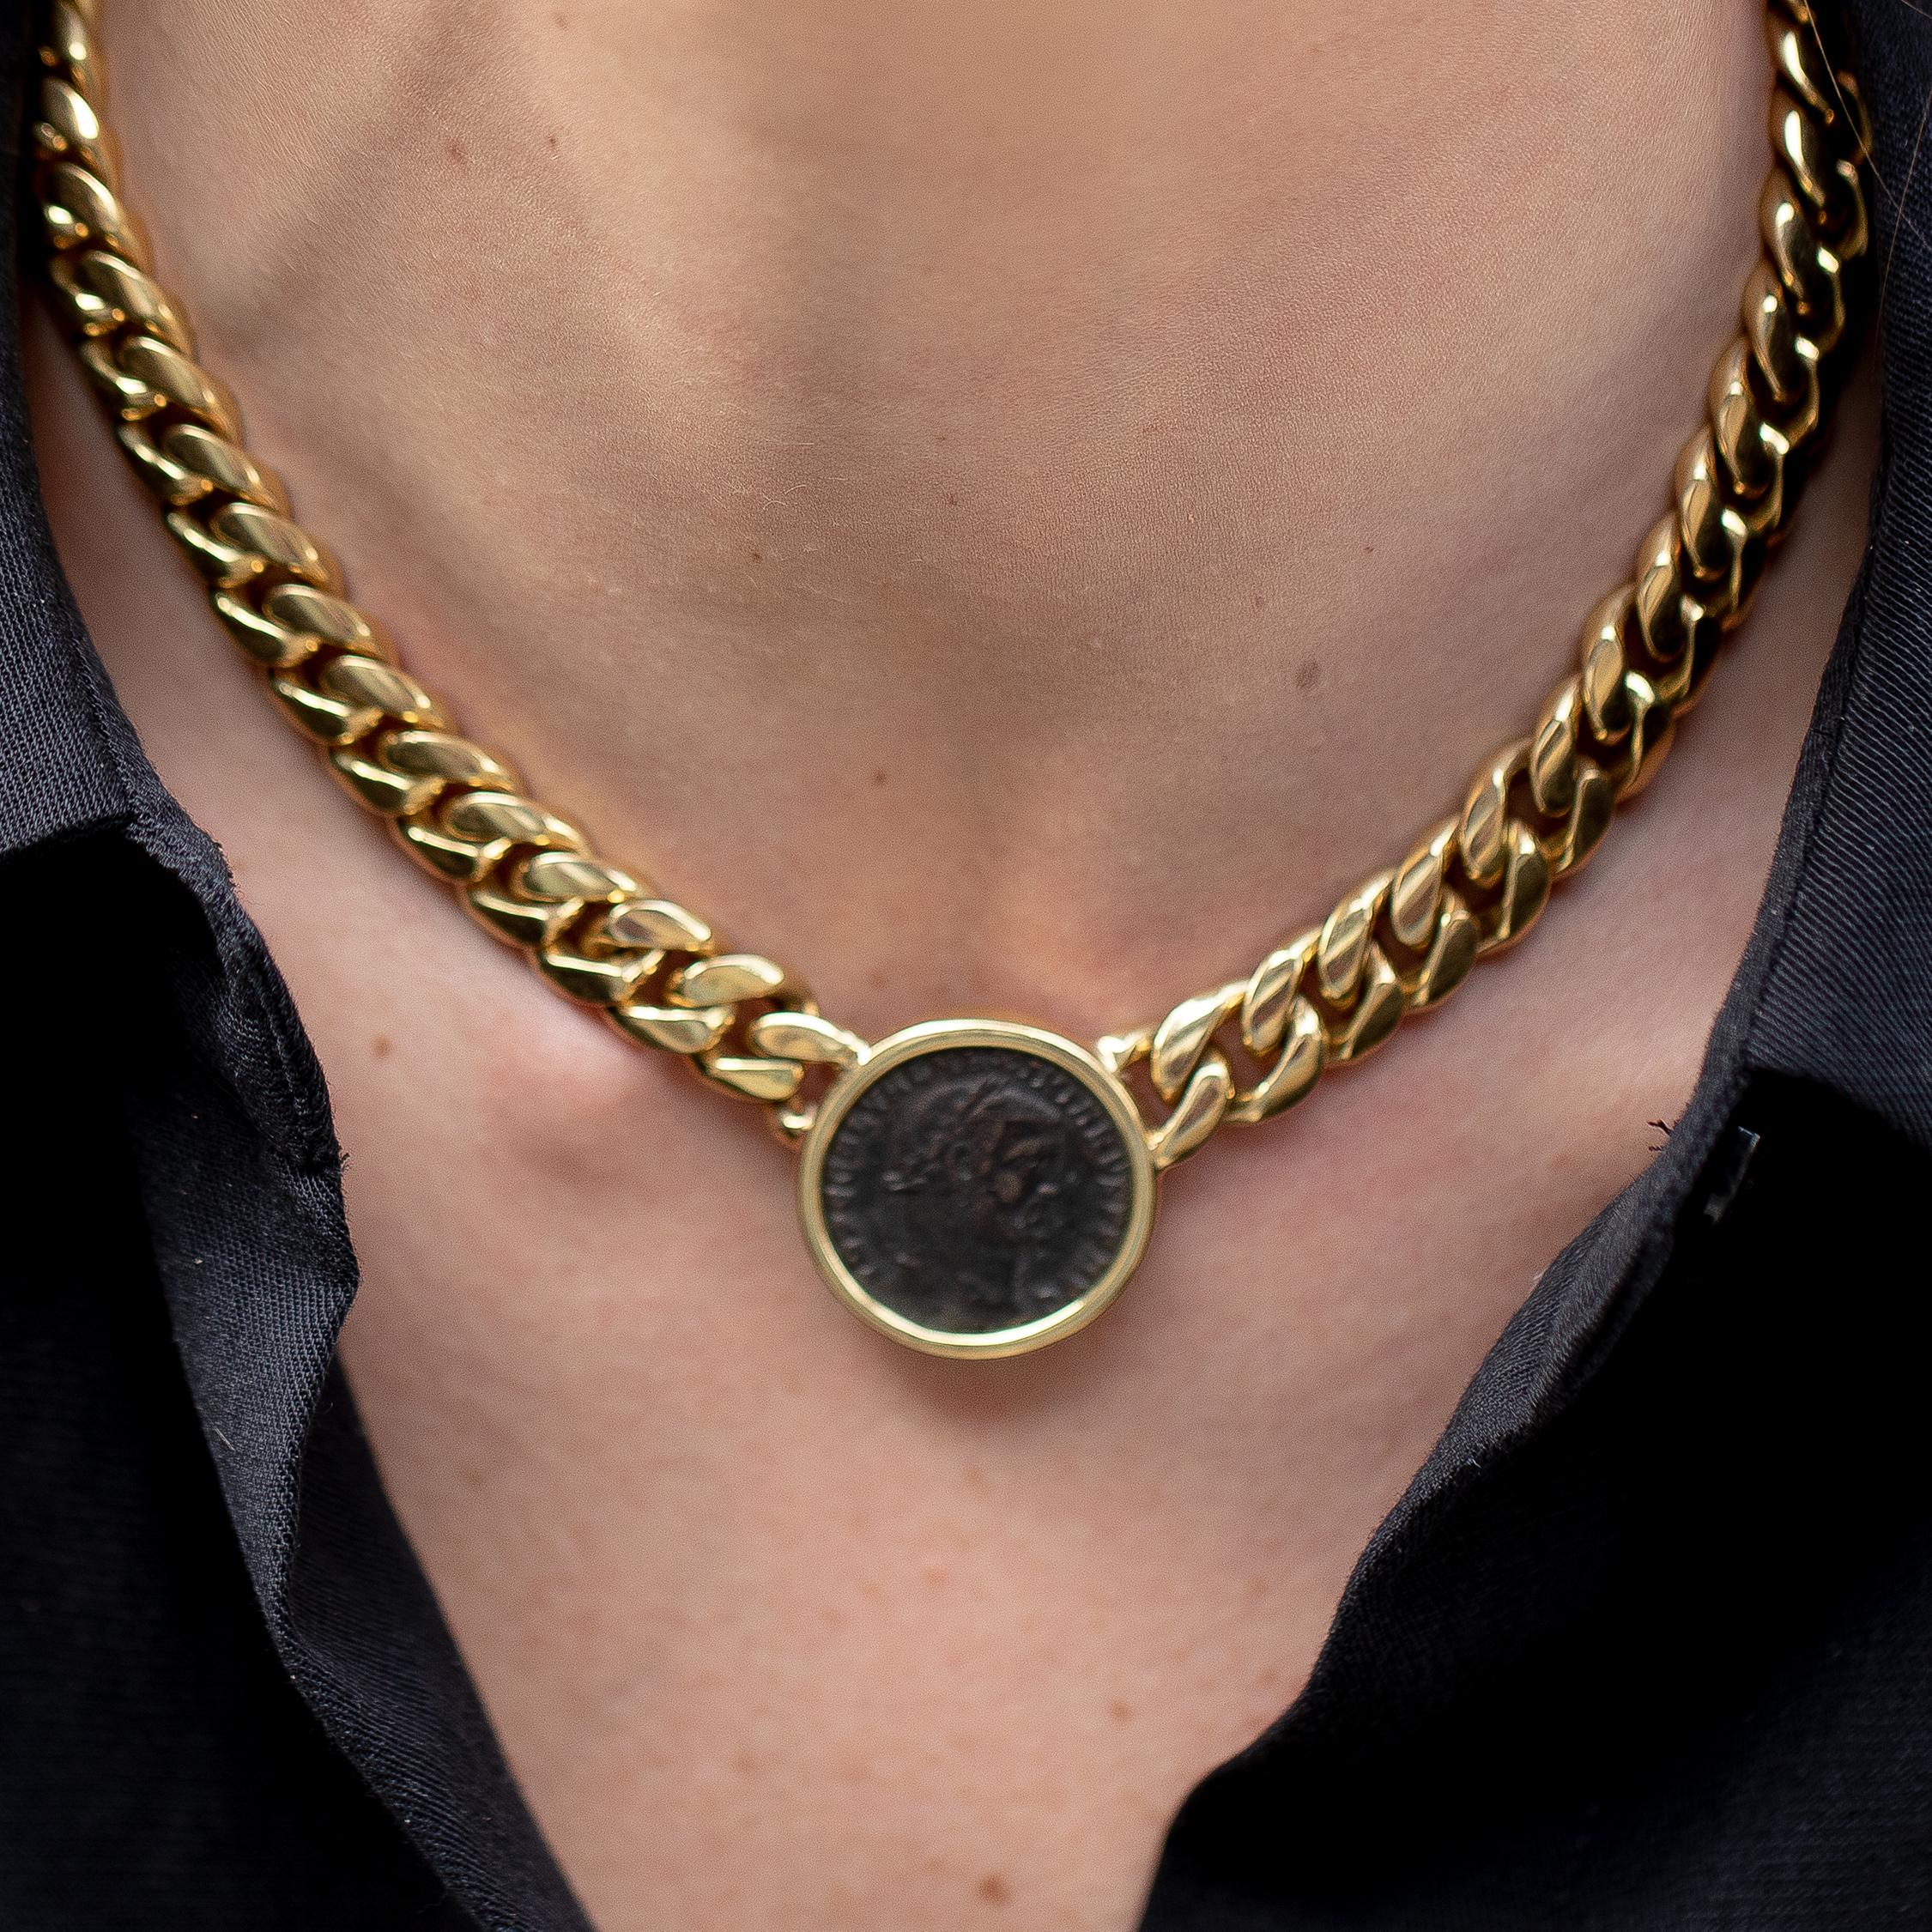 Bvlgari 18K Yellow Gold Necklace
Roman Empire Coin
Maximi Anvs 285-308 AD
Length = 16.5 Inches
Weight: = 160 grams
Jewelry Gift Box Included